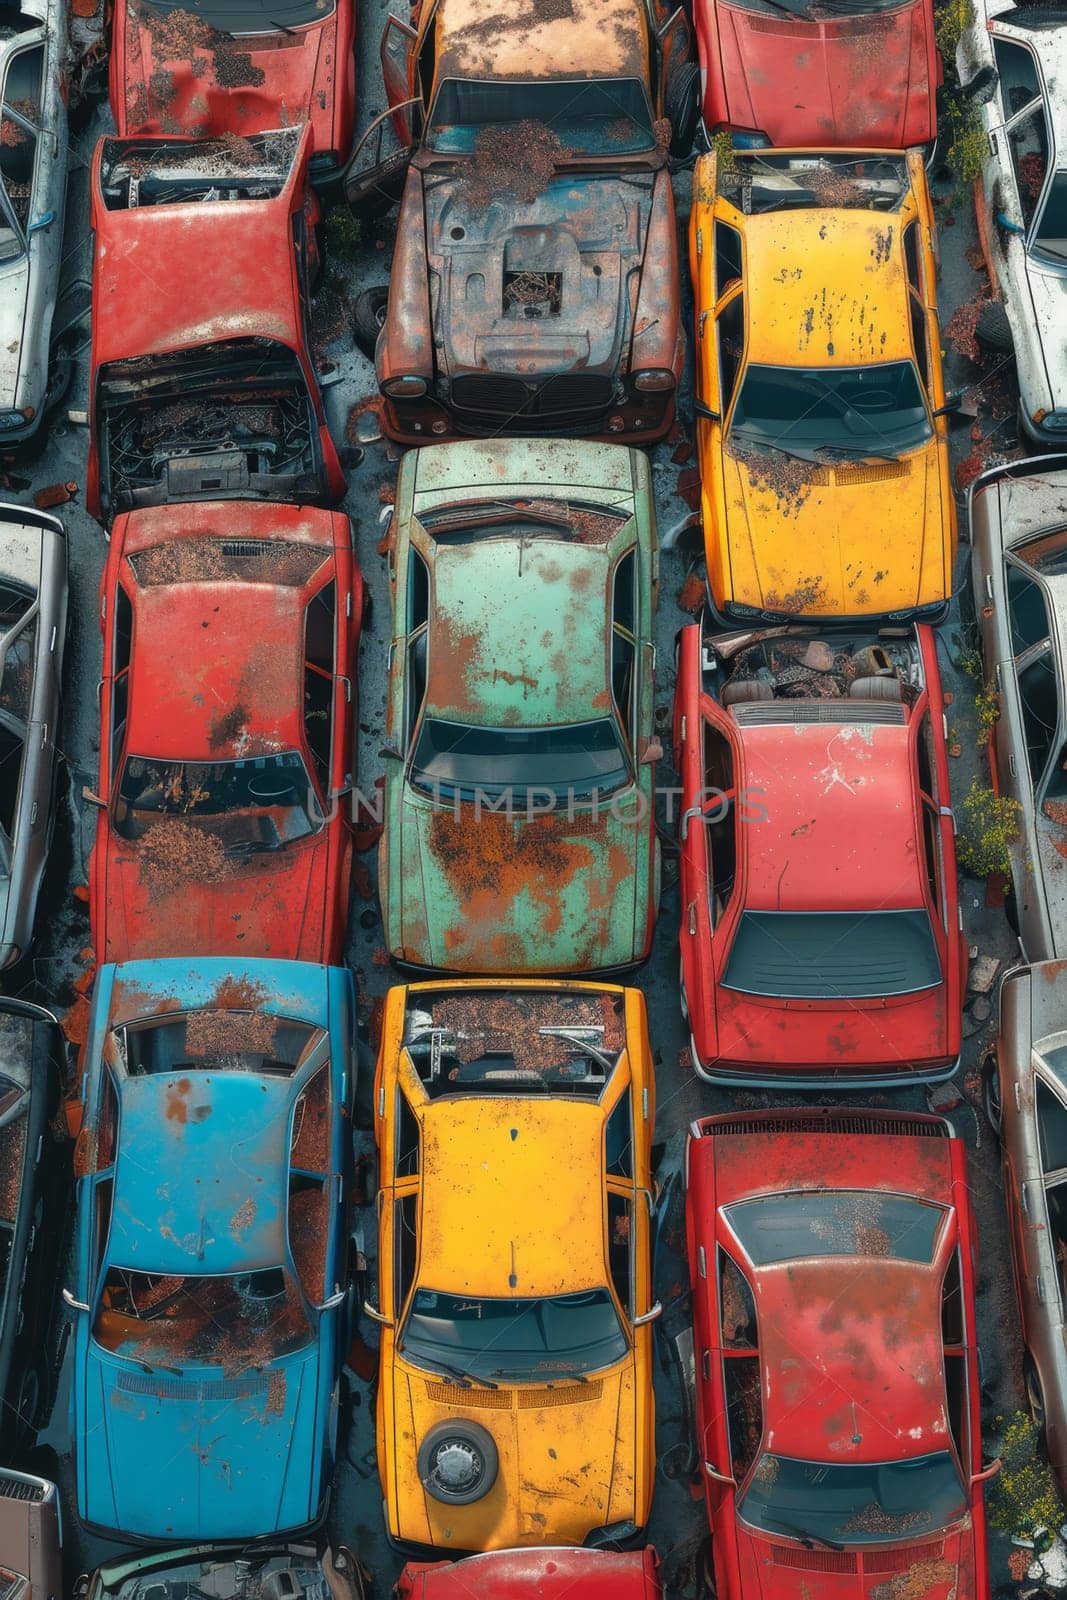 A bird's-eye view of abandoned multicolored old cars.